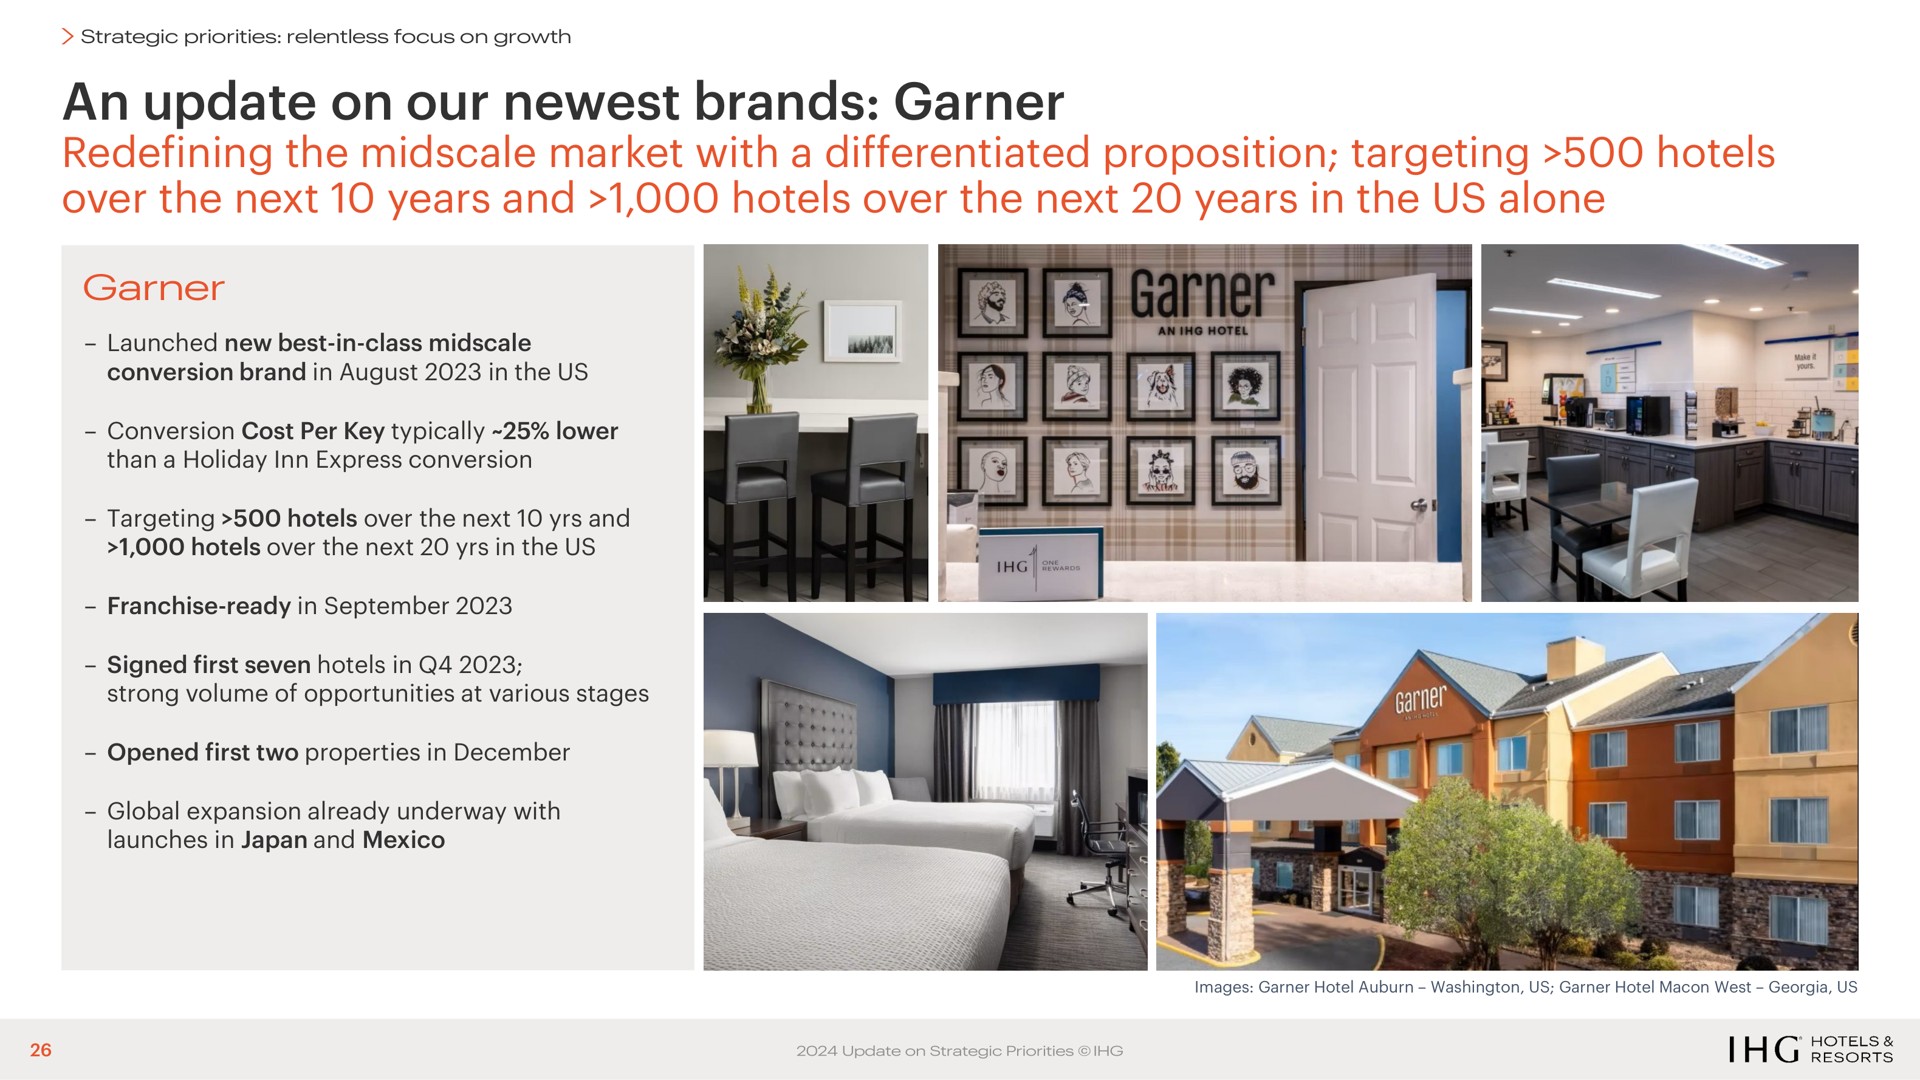 an update on our brands garner redefining the market with a differentiated proposition targeting hotels over the next years and hotels over the next years in the us alone | IHG Hotels